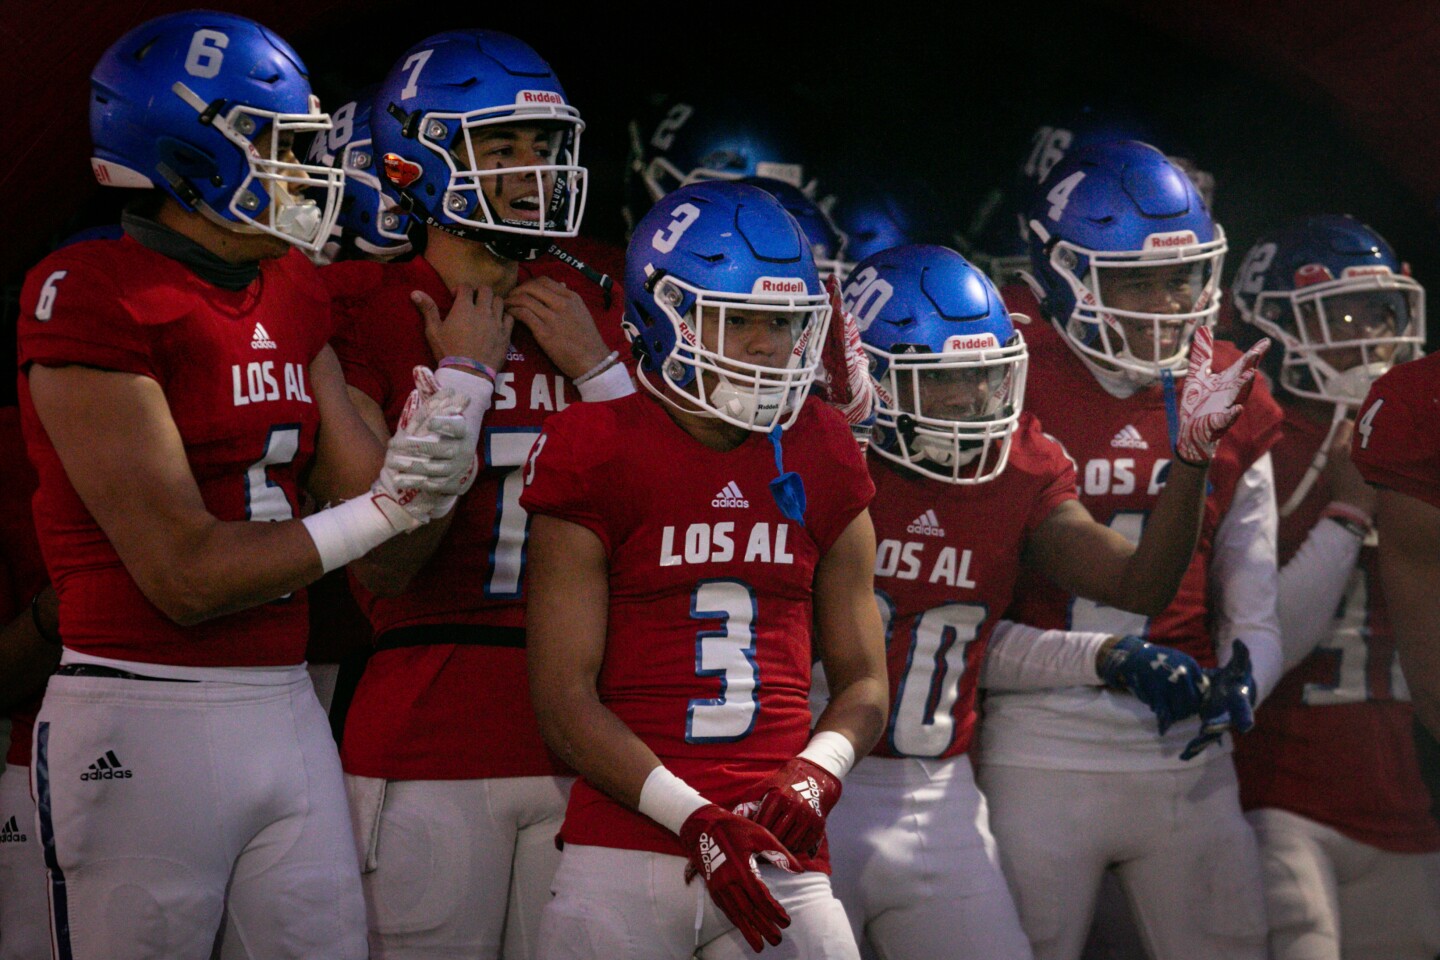 LOS ALAMITOS, CA - MARCH 12: Los Alamitos football team enter the field for their first game of the season against Millikan on Friday, March 12, 2021. (Jason Armond / Los Angeles Times)